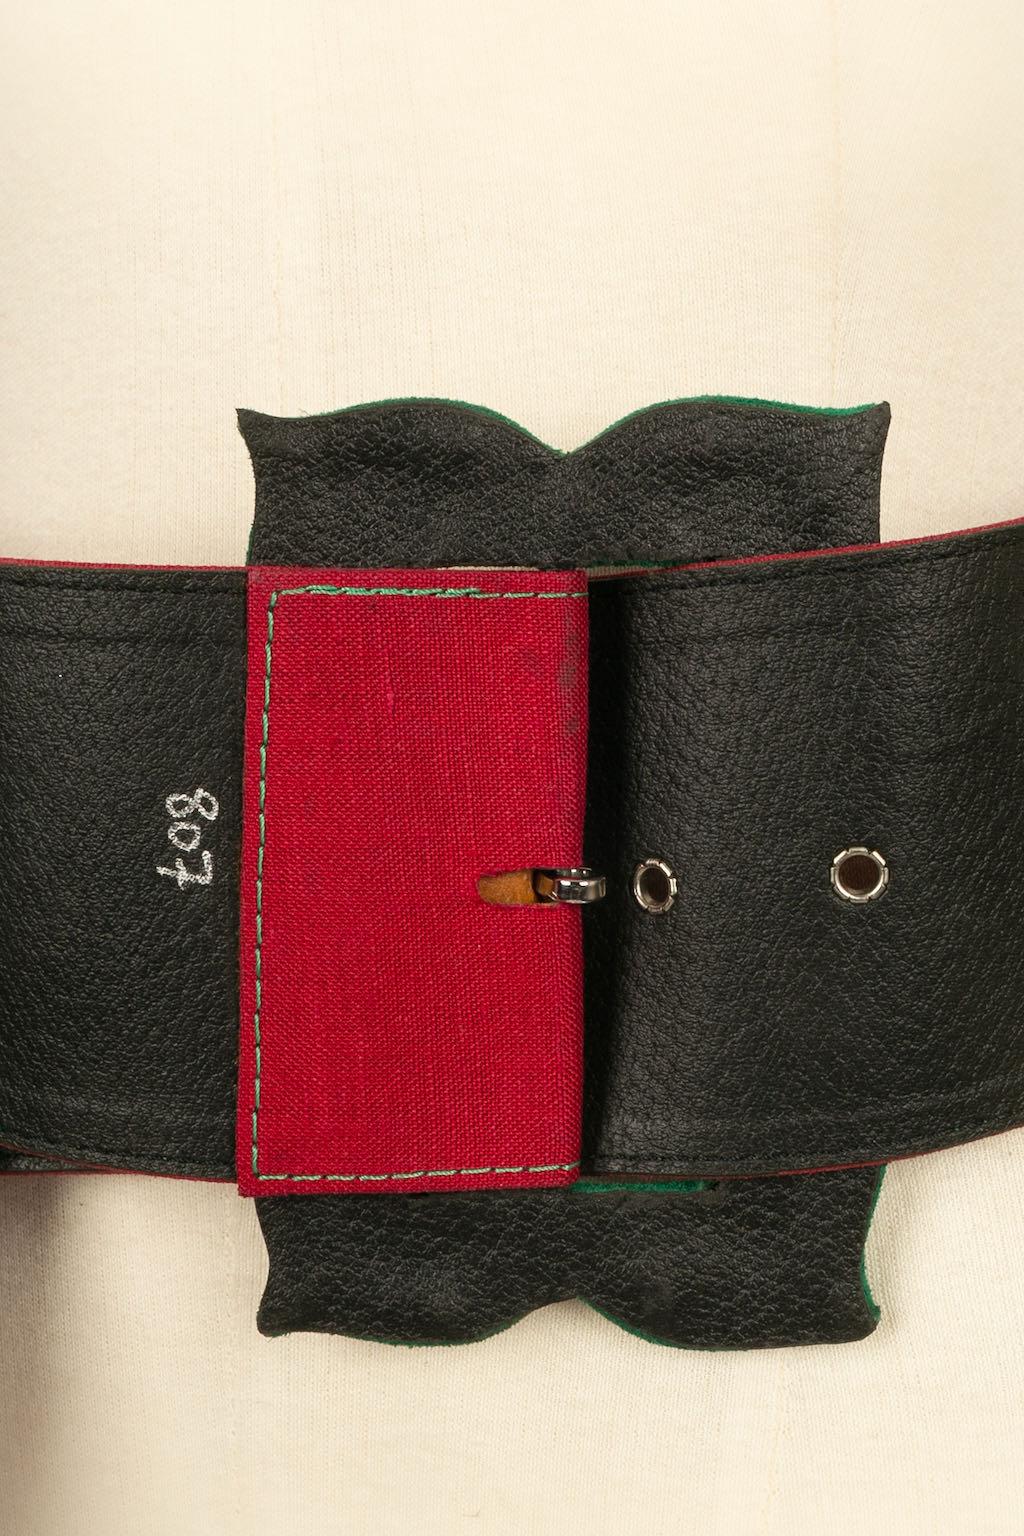 Chantal Thomass Black Leather and Red Cotton Belt, 1993 Fashion Show For Sale 3